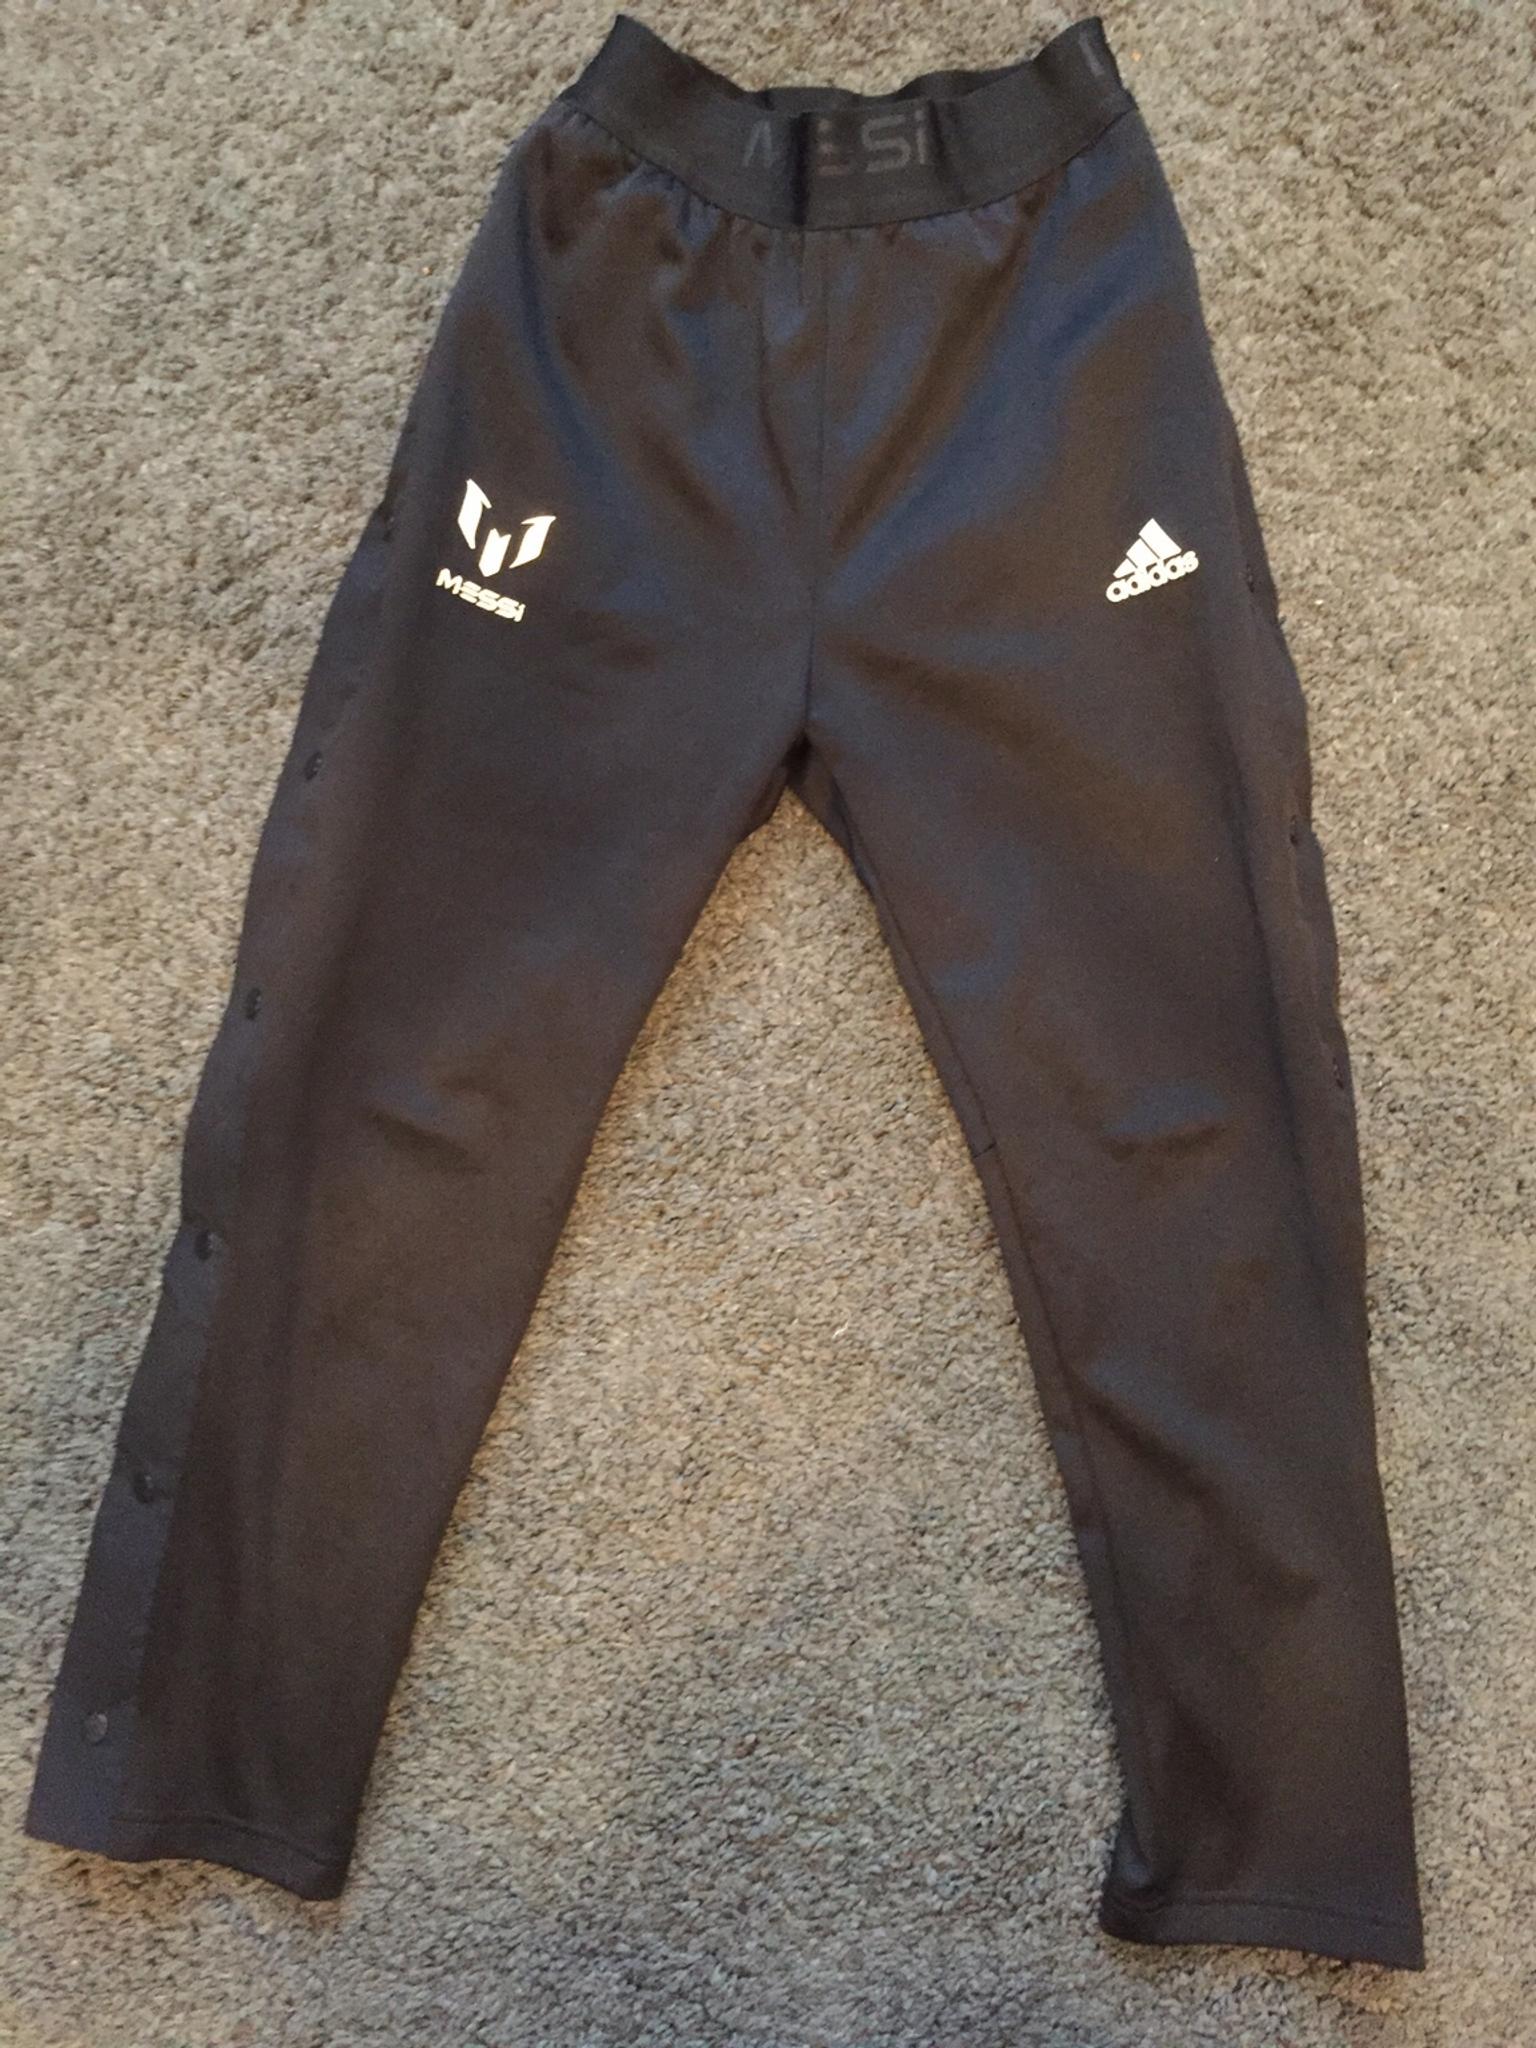 Original boys Messi adidas tracksuit bottoms in E7 London for £10.00 for  sale | Shpock